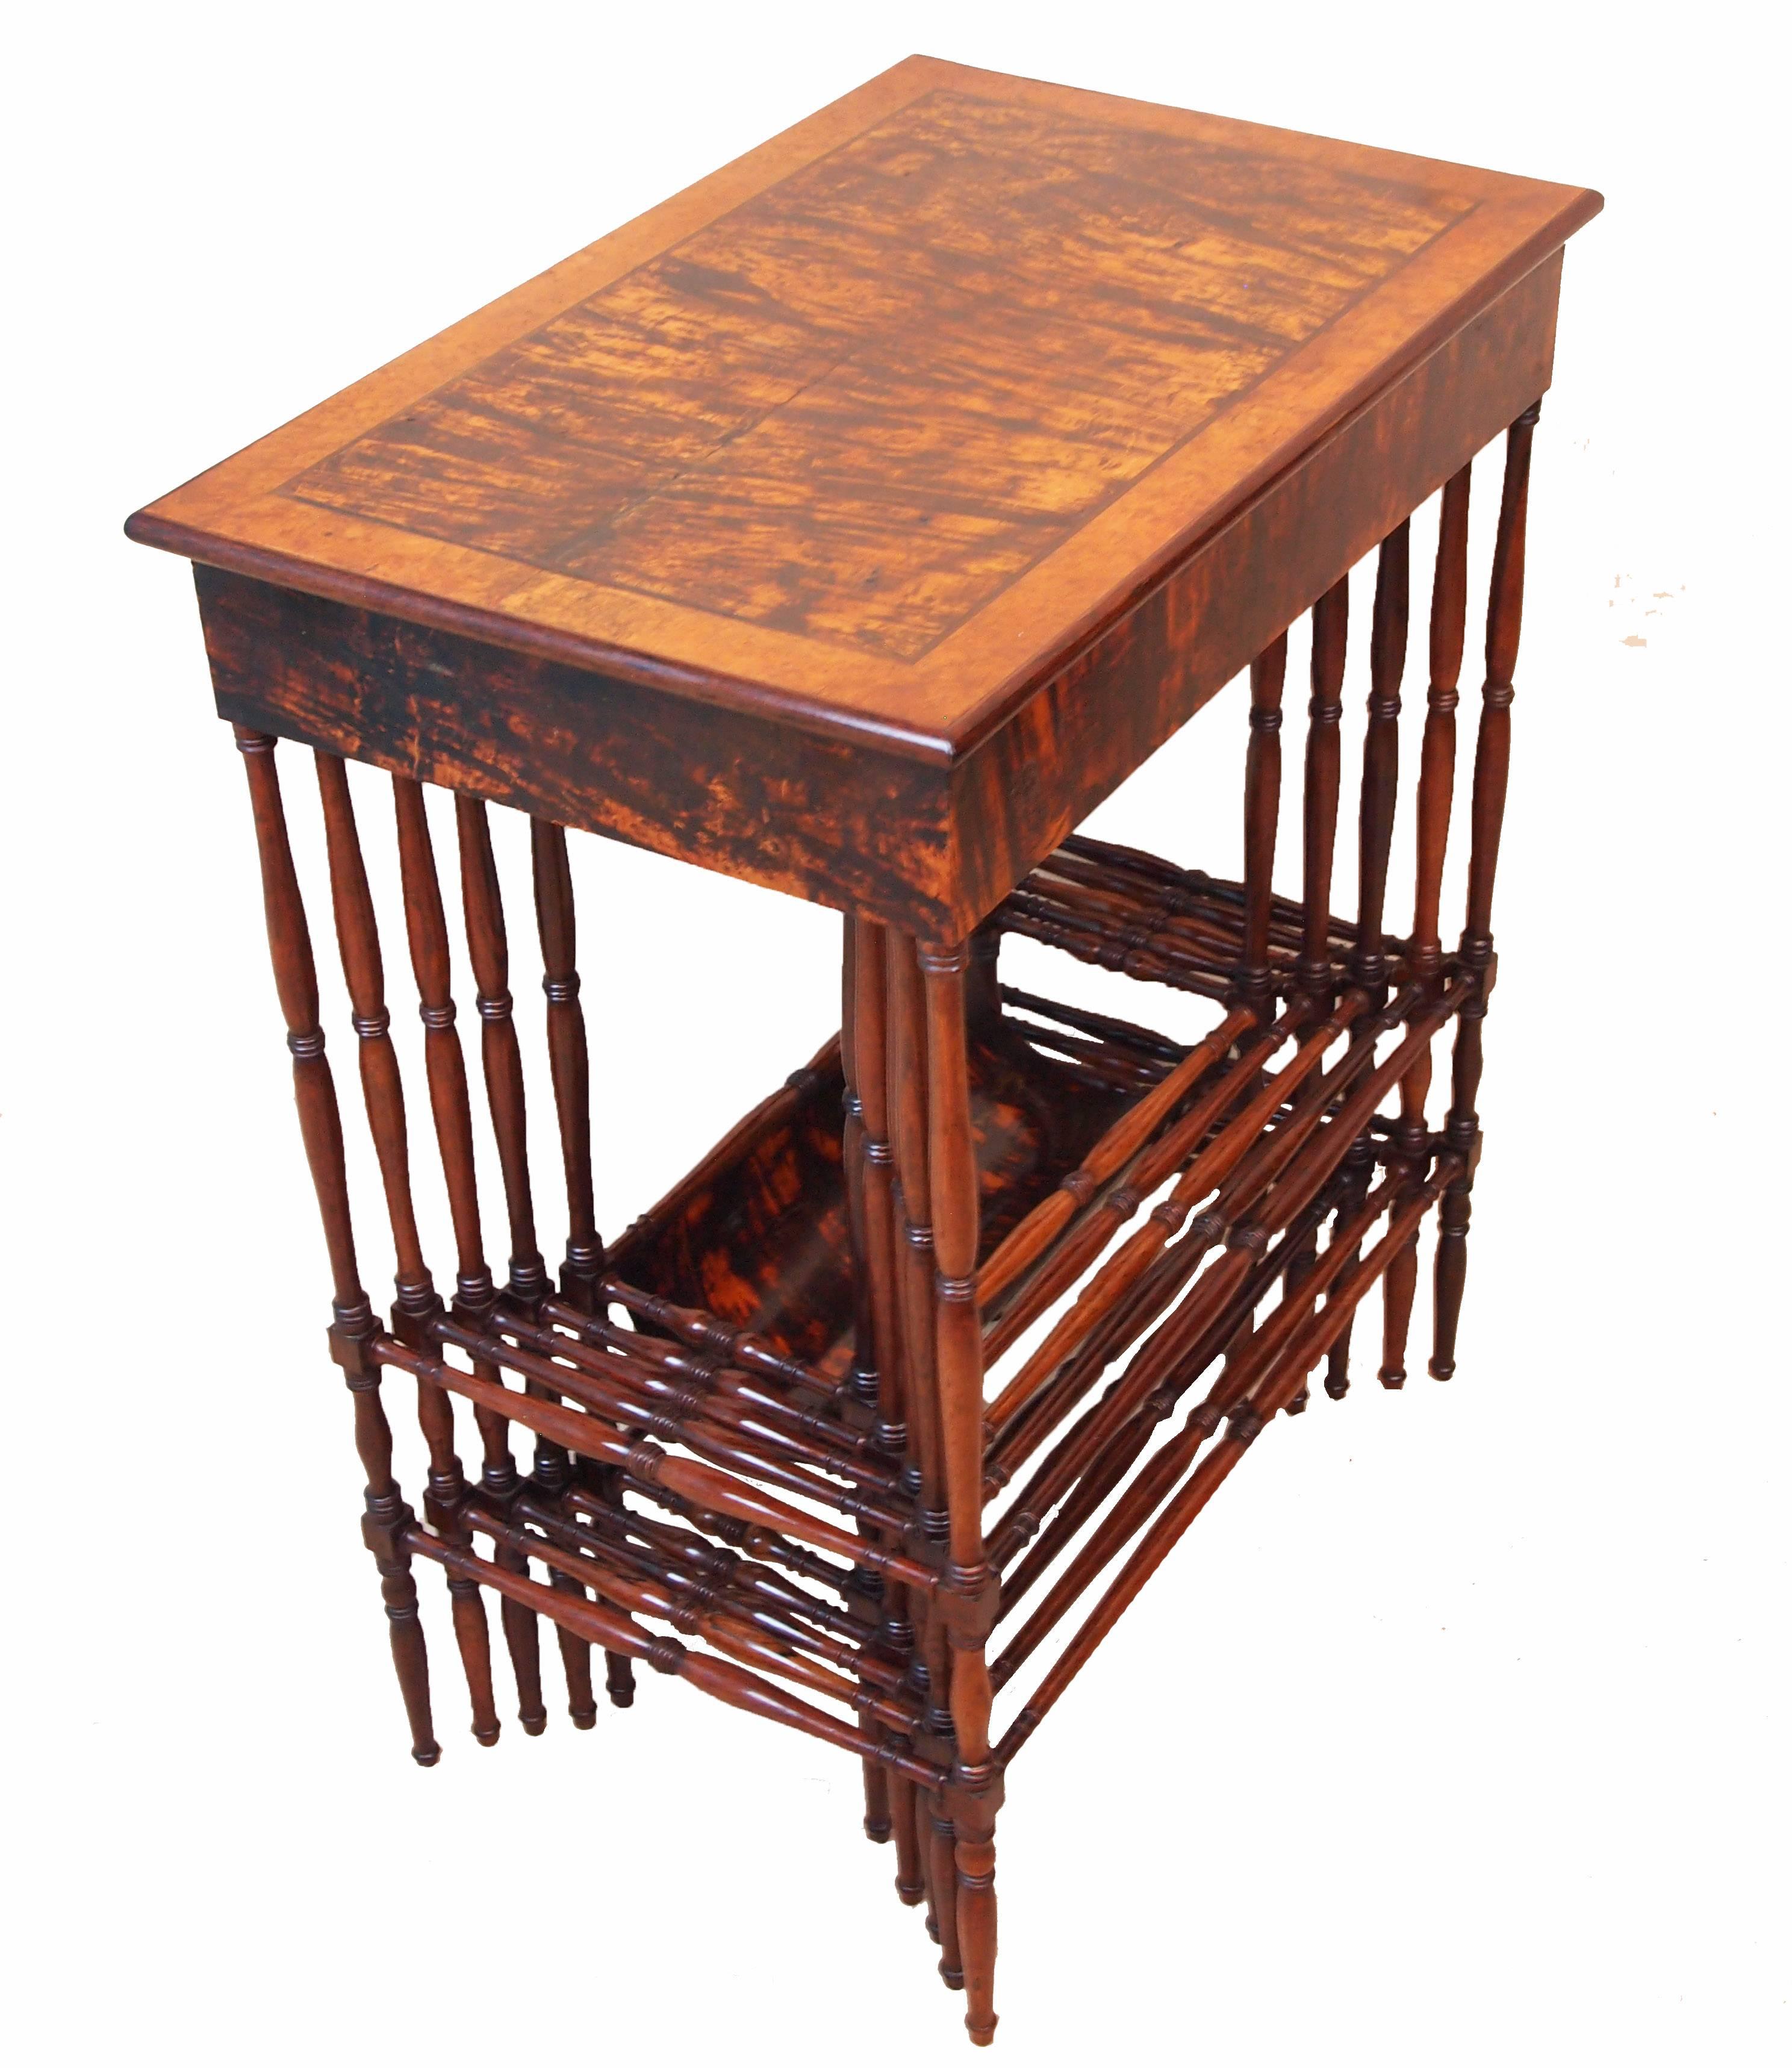 An exceptionally fine late Regency period nest of five specimen wood veneered coffee tables, having crossbanded tops incorporating mulberry, satinwood, amboyna. Mahogany, and maple
veneers raised on elegant turned upright supports and stretchers